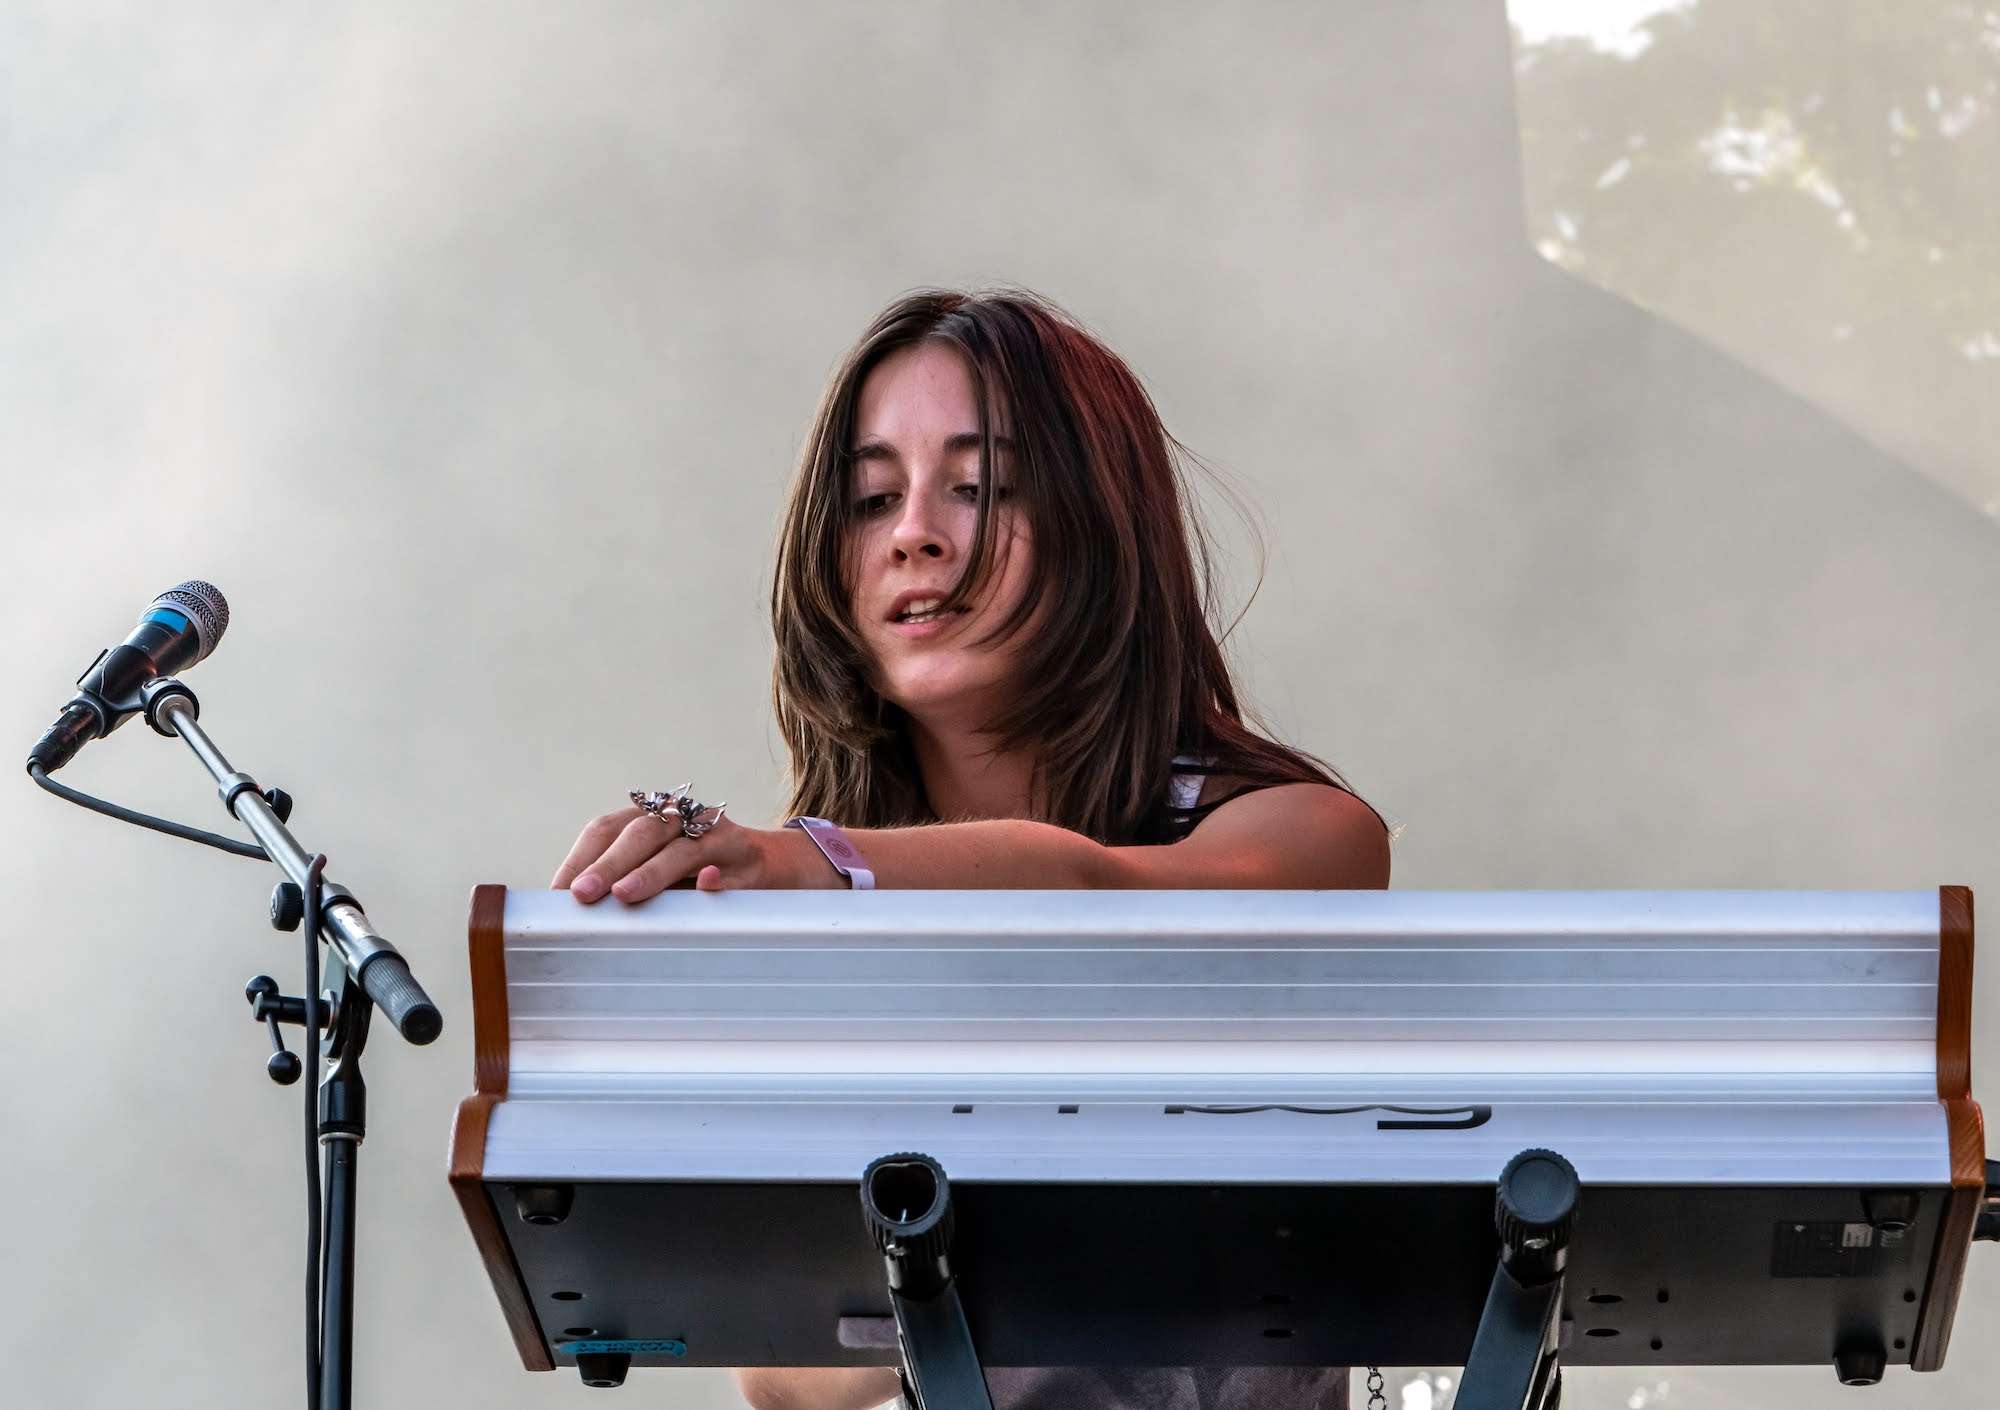 Nation Of Language Live At Pitchfork [GALLERY] 3